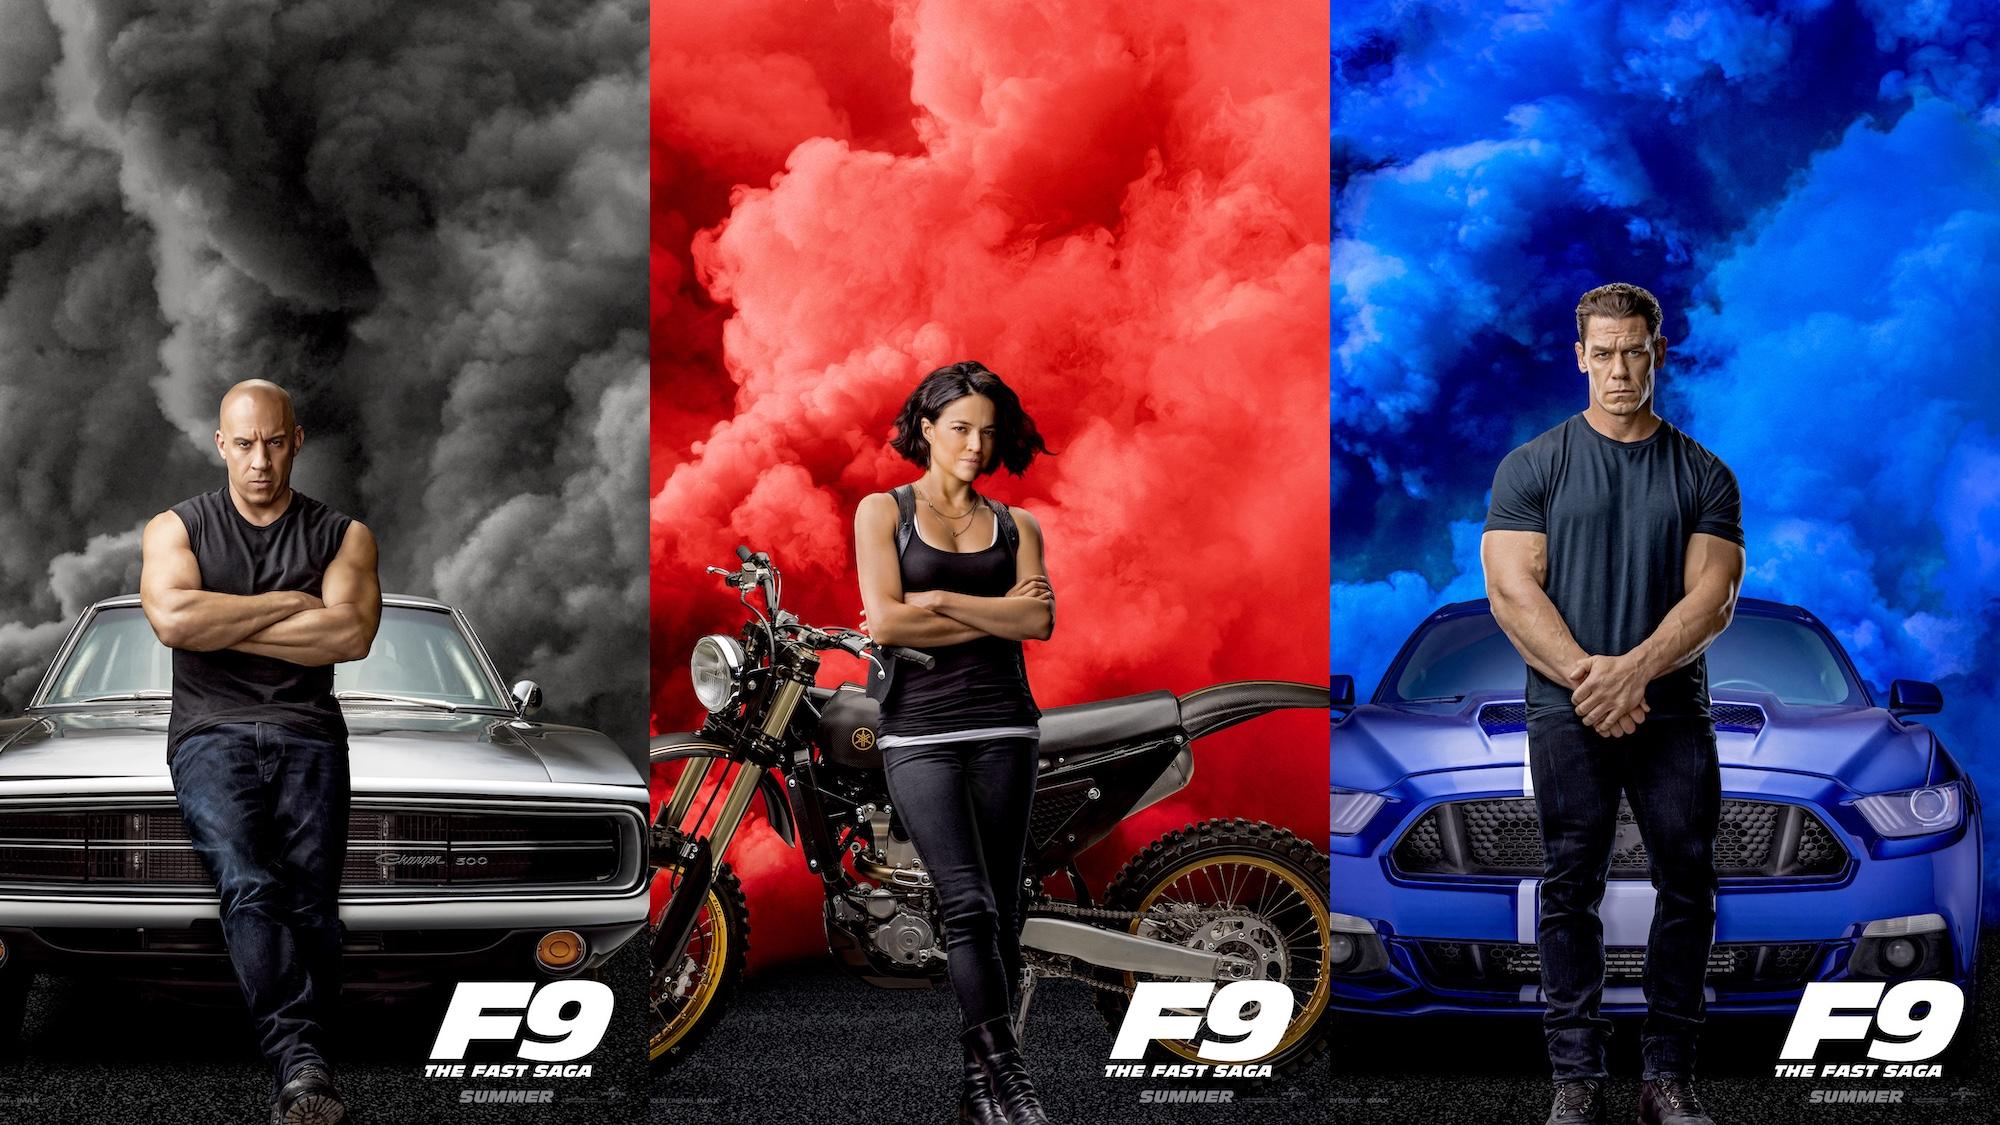 Fast and Furious 9 HD desktop wallpapers